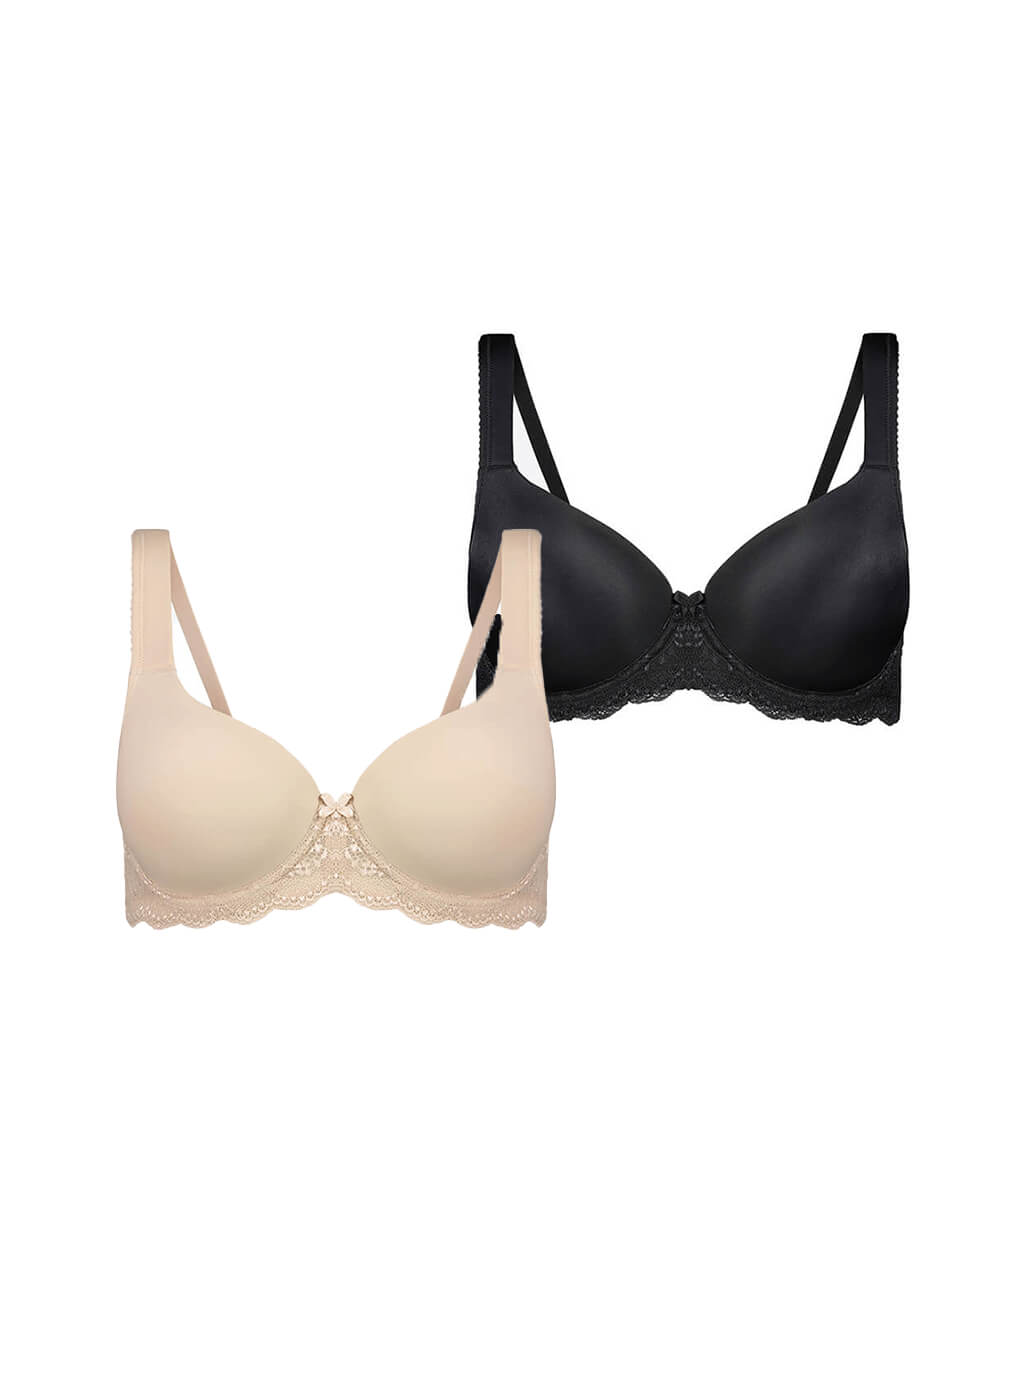 Smooth T Shirt Bras (2 Pack) - Black and nude Latte